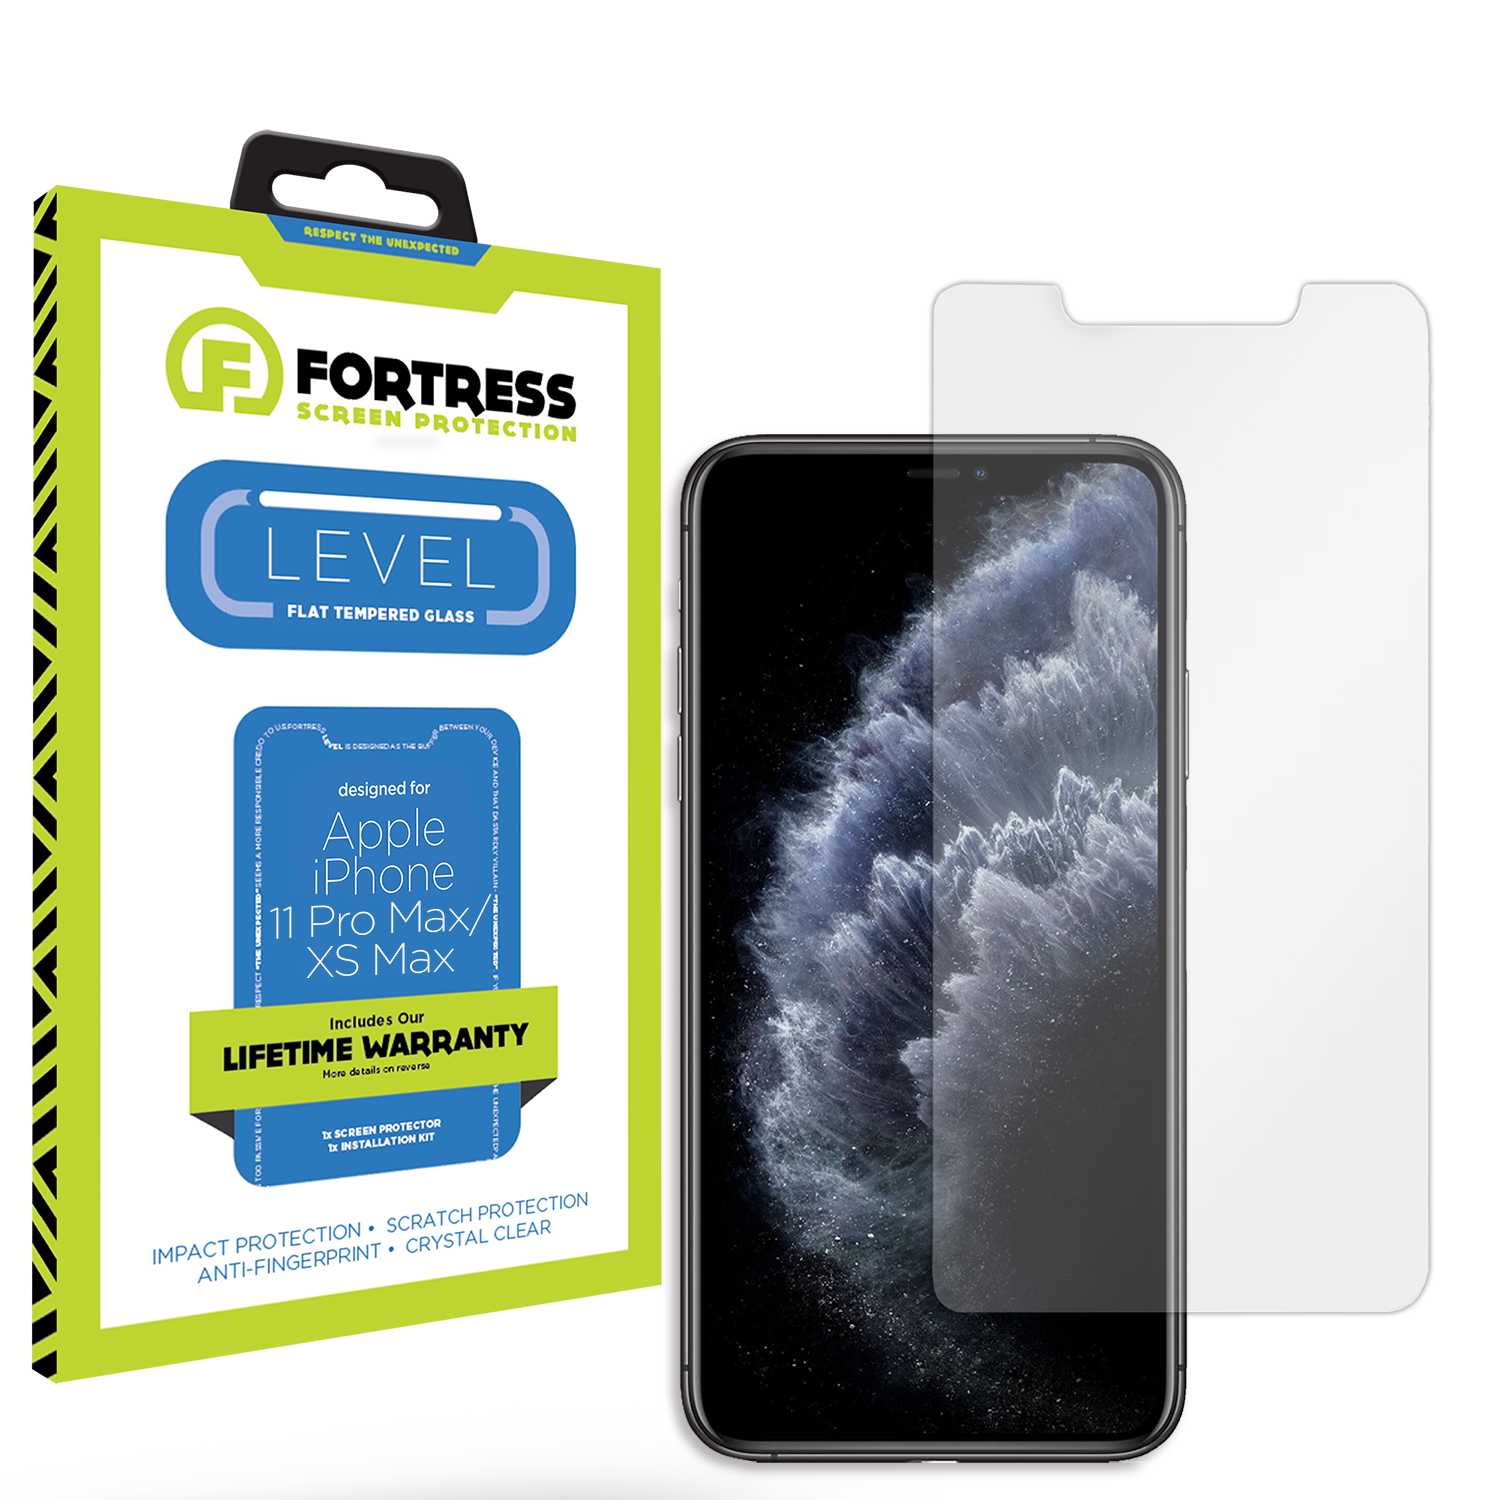 Fortress iPhone 11 Pro Max Screen Protector $0Coverage Scooch Screen Protector